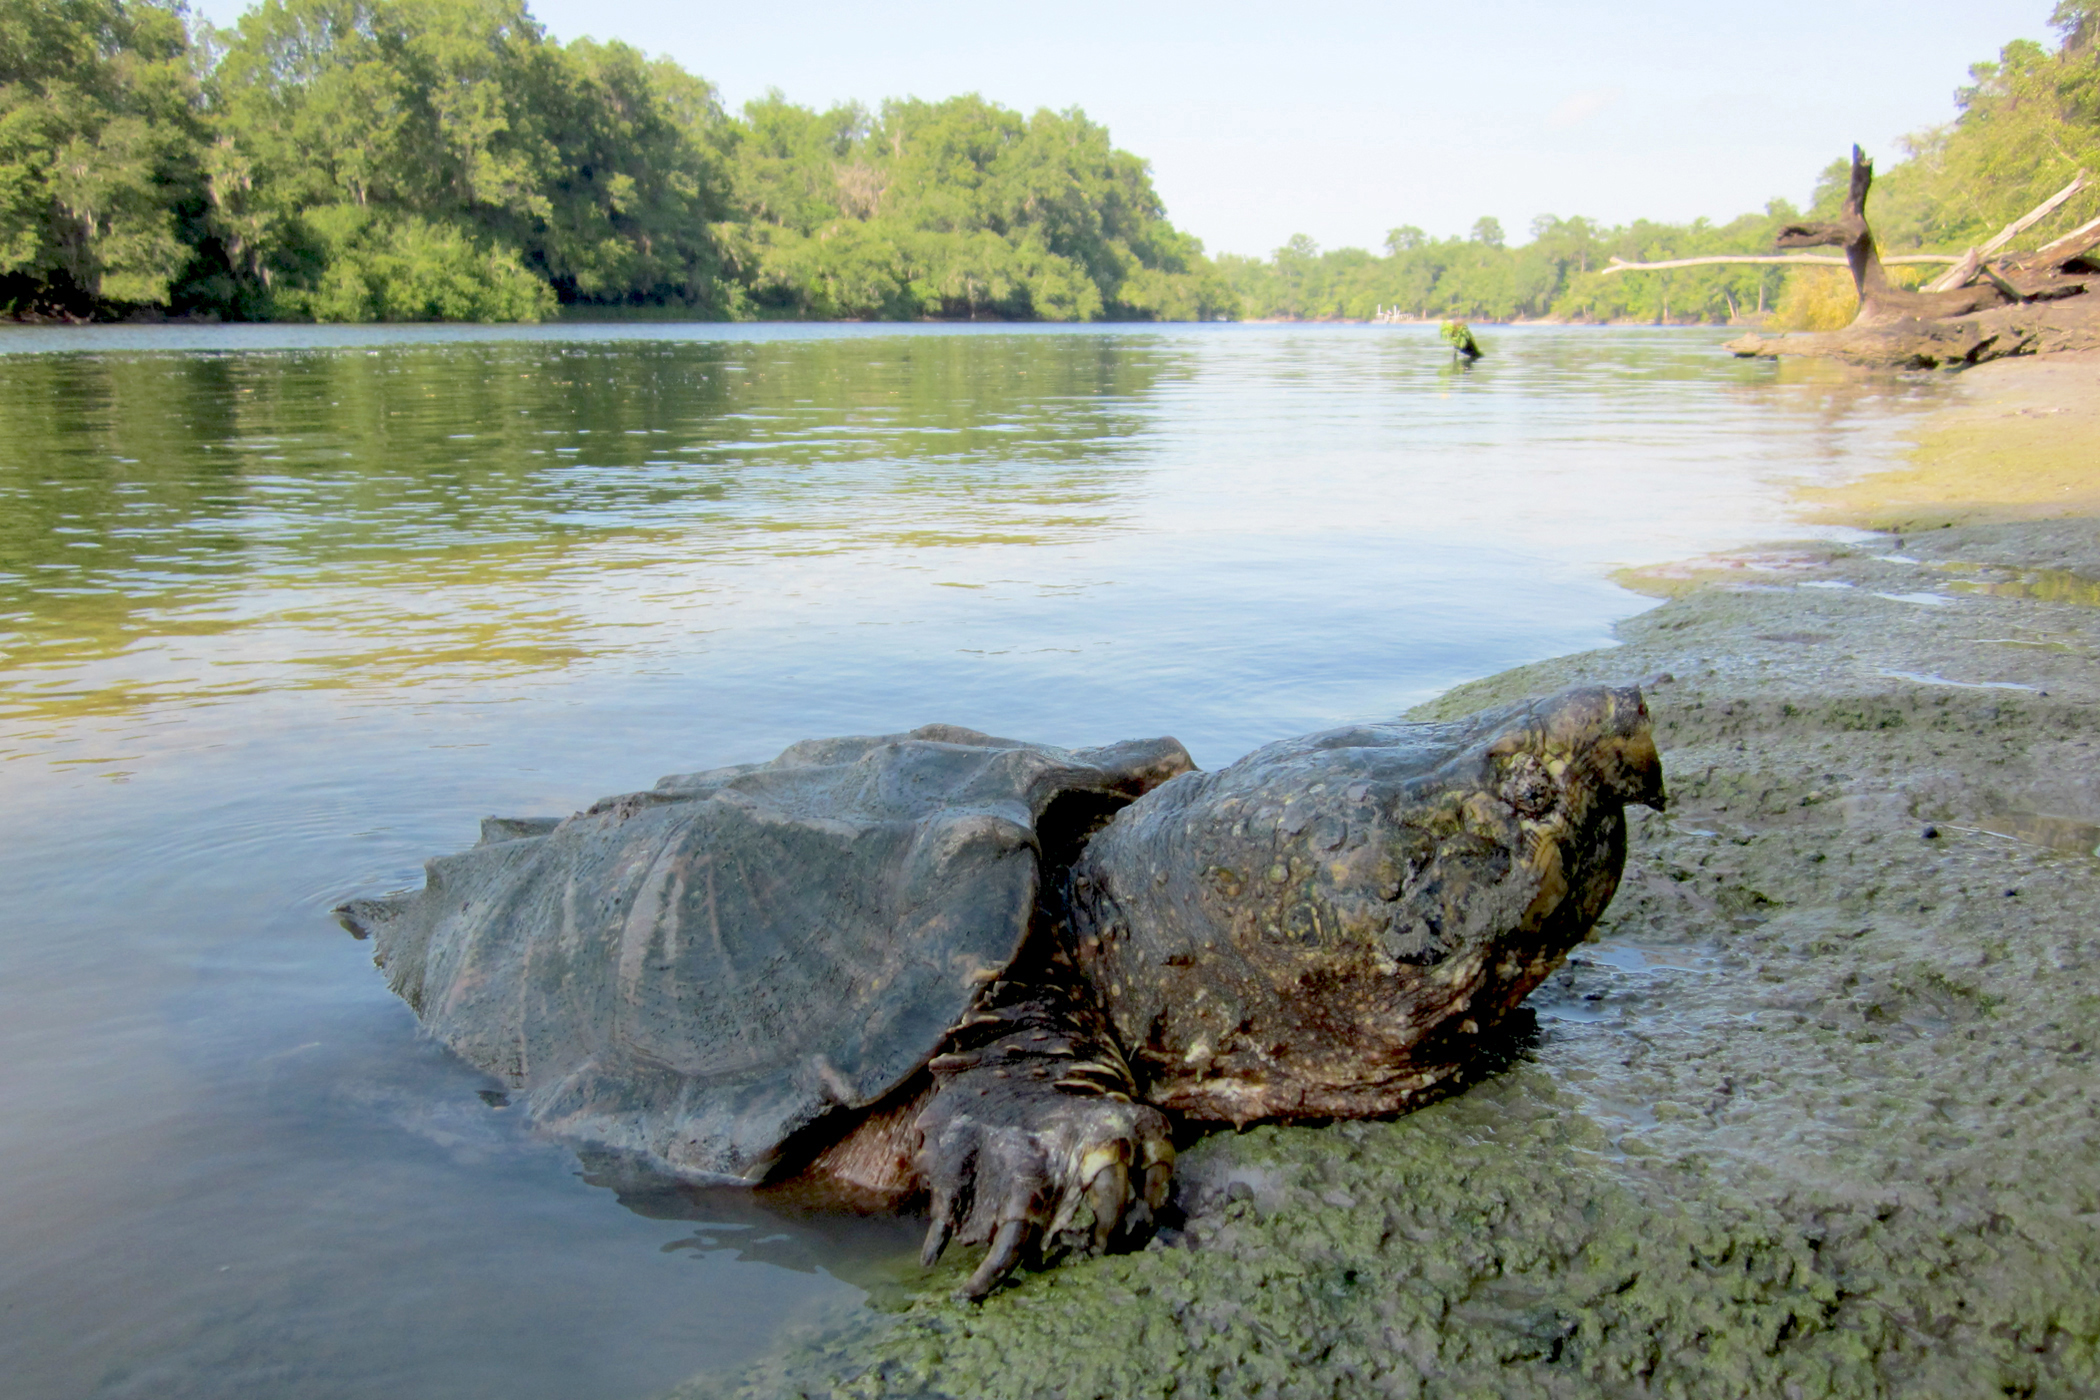 Dinosaurs of the turtle world' at risk in Southeast rivers ...